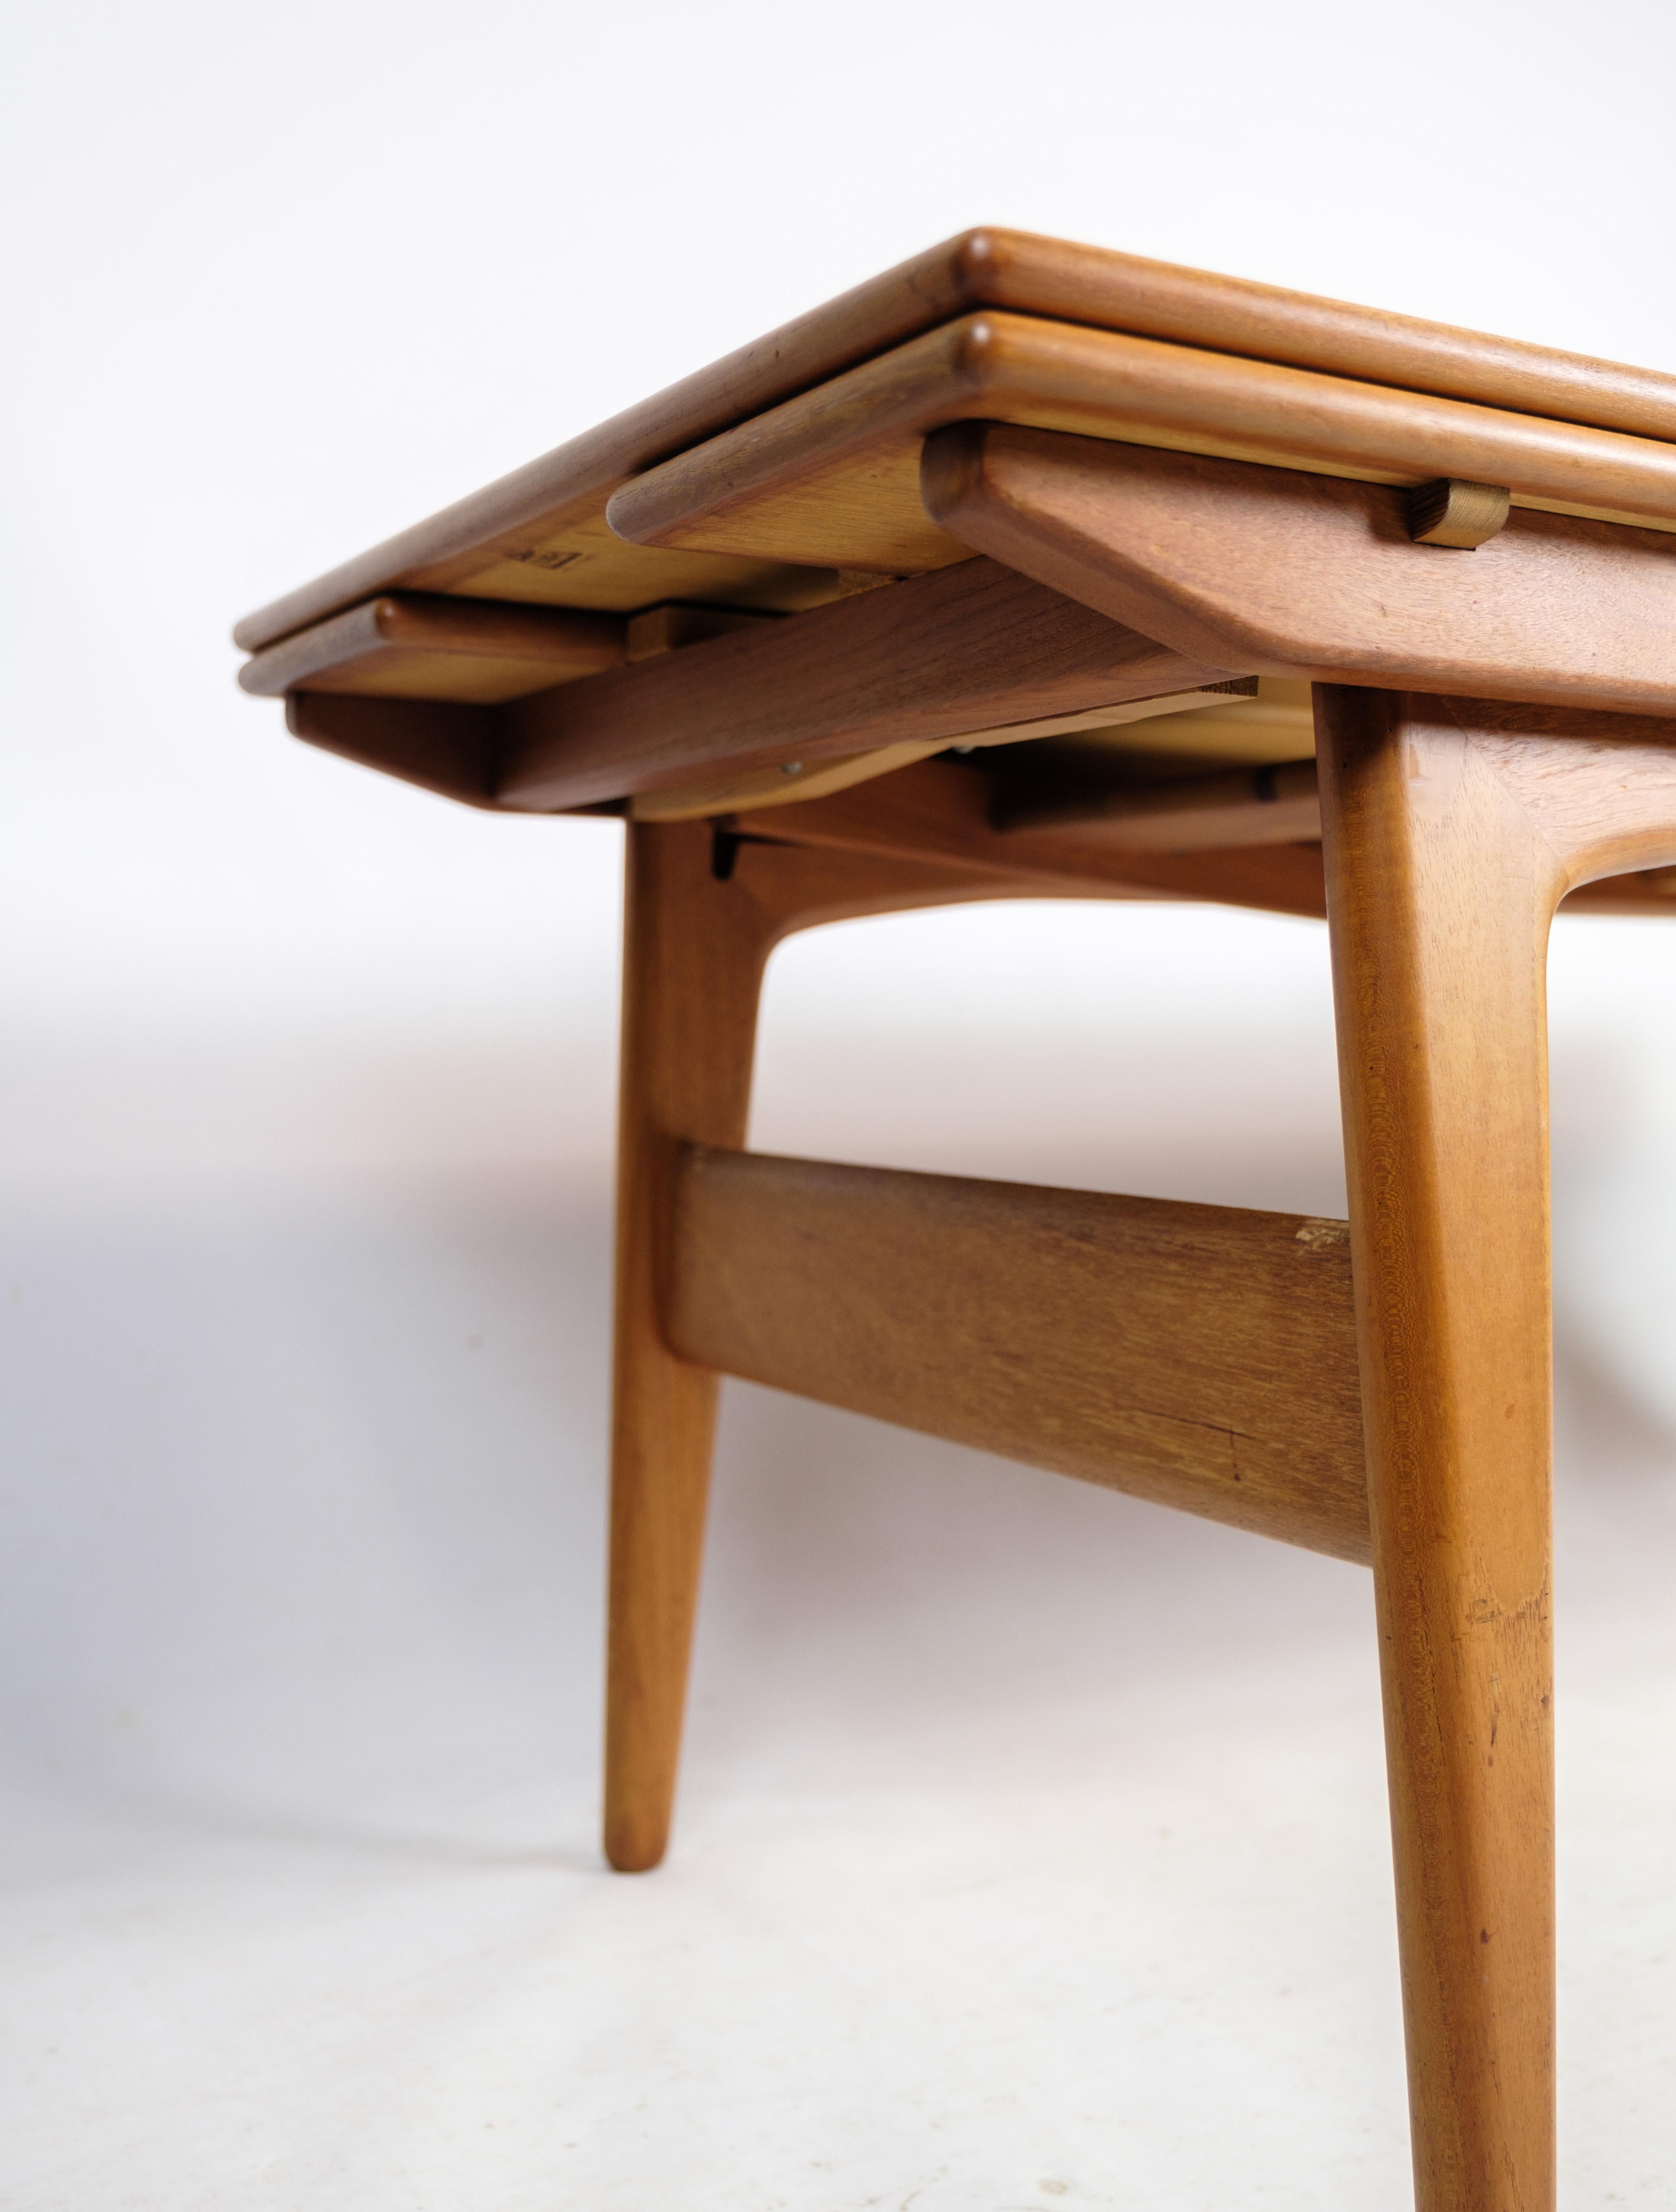 Coffee table / dining table in teak wood, often called a Copenhagen table, made by a Danish furniture manufacturer from around the 1960s.